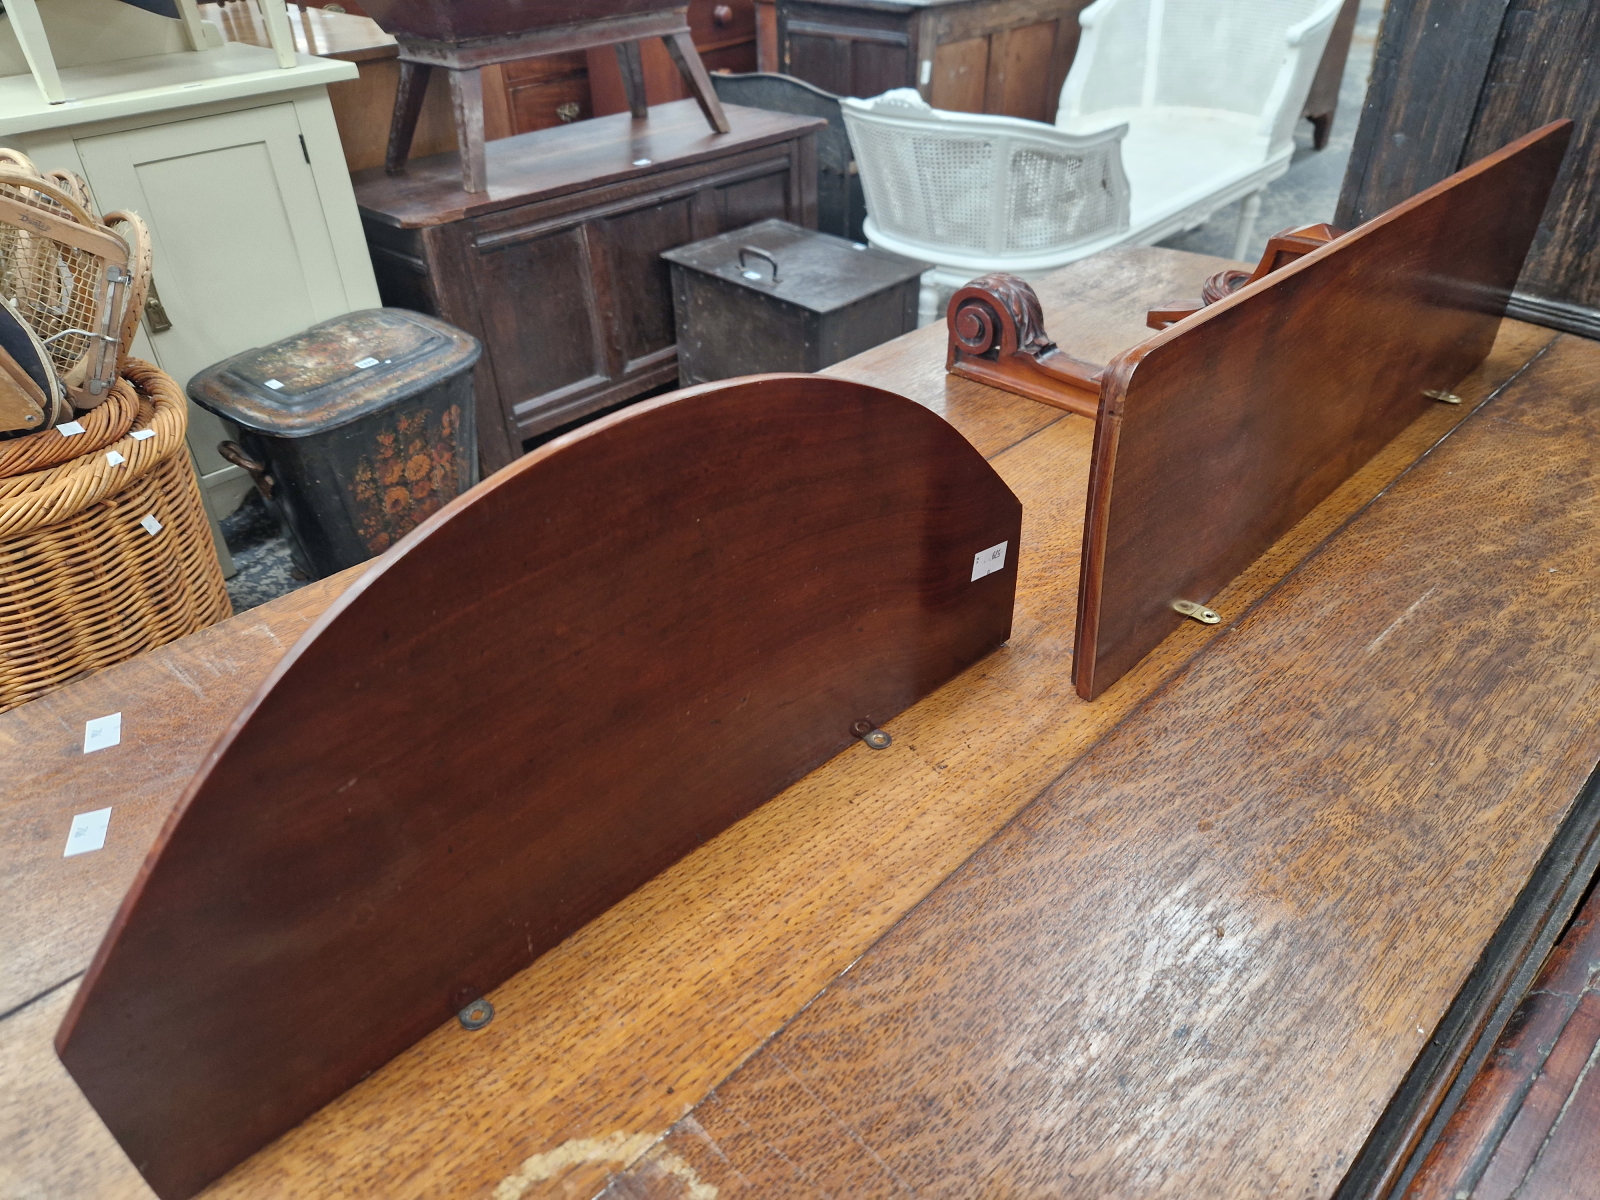 TWO LATE VICTORIAN MAHOGANY WALL SHELVES, ONE RECTANGULAR AND THE OTHER HALF ROUND - Image 4 of 4